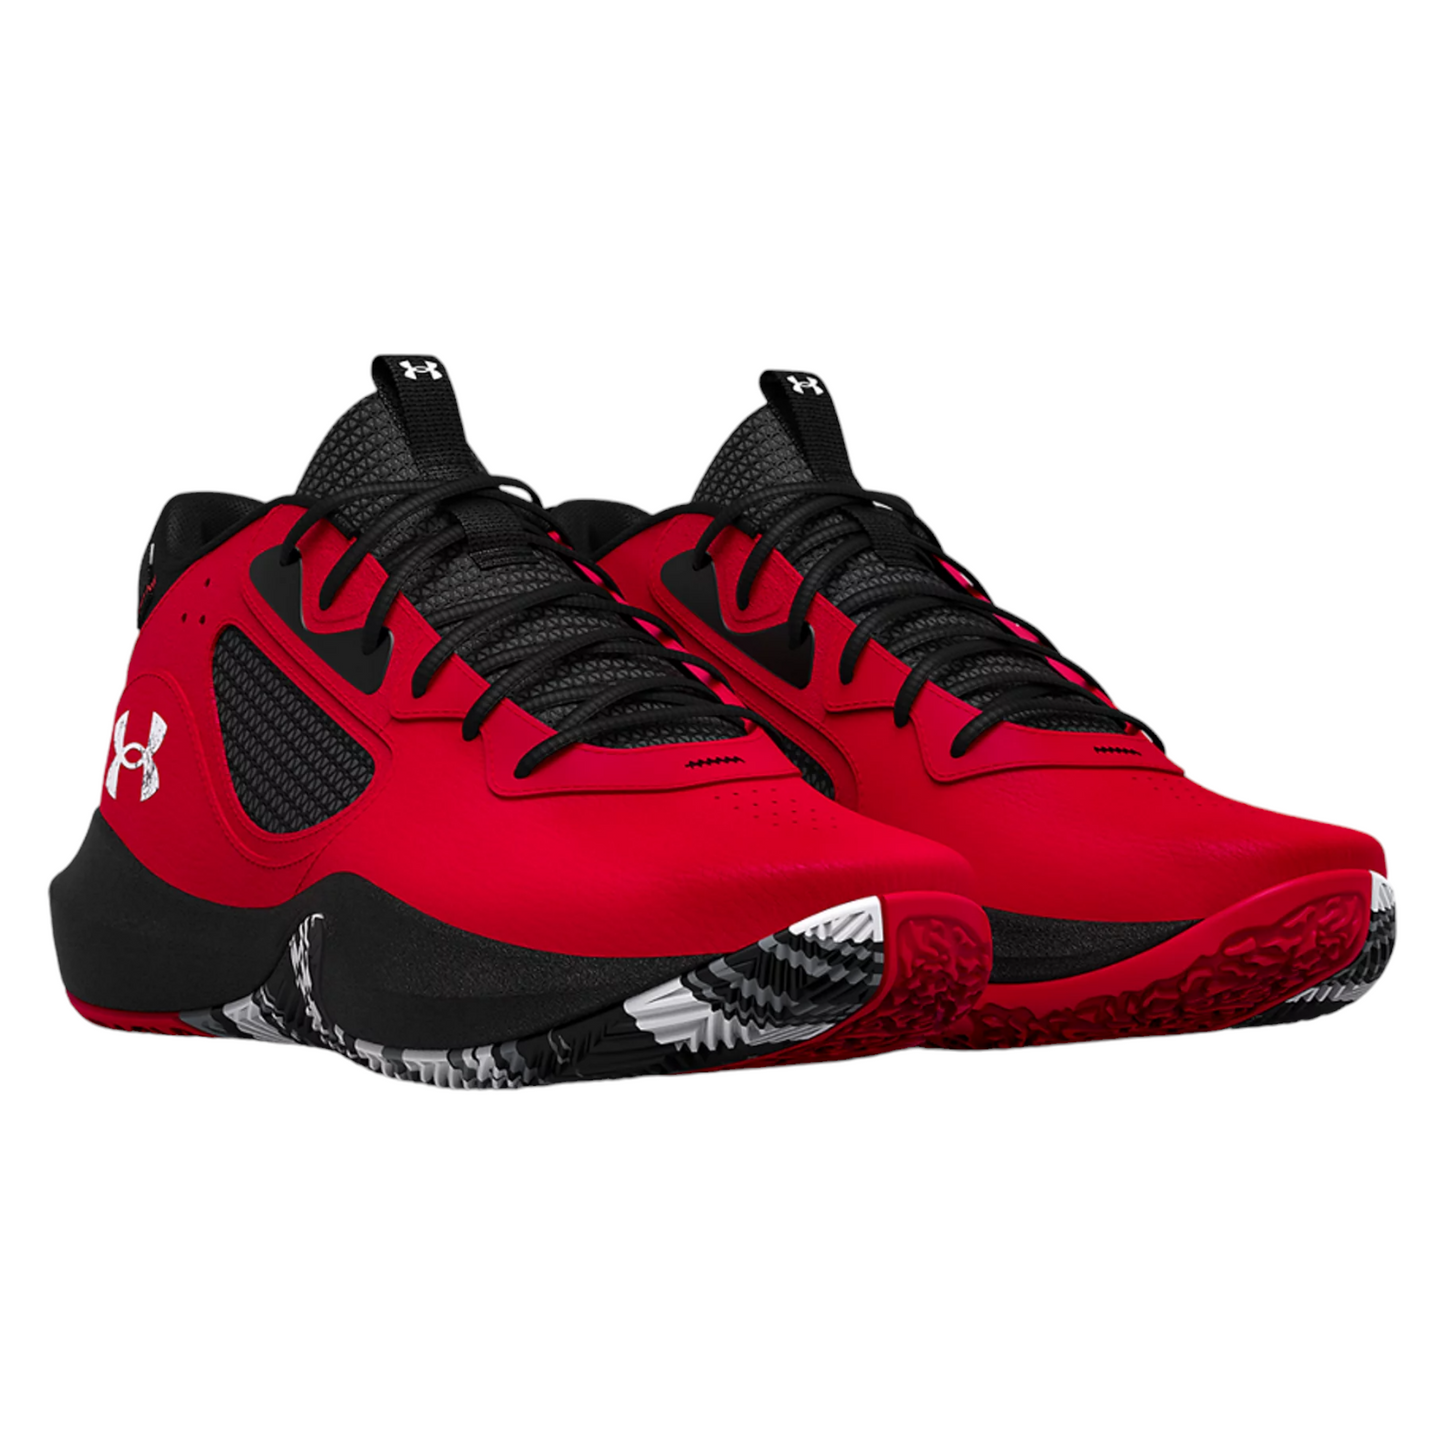 - UNDER ARMOUR MENS LOCKDOWN 6 RED/BLACK/WHITE (3025616 600) - DOW - R2L17